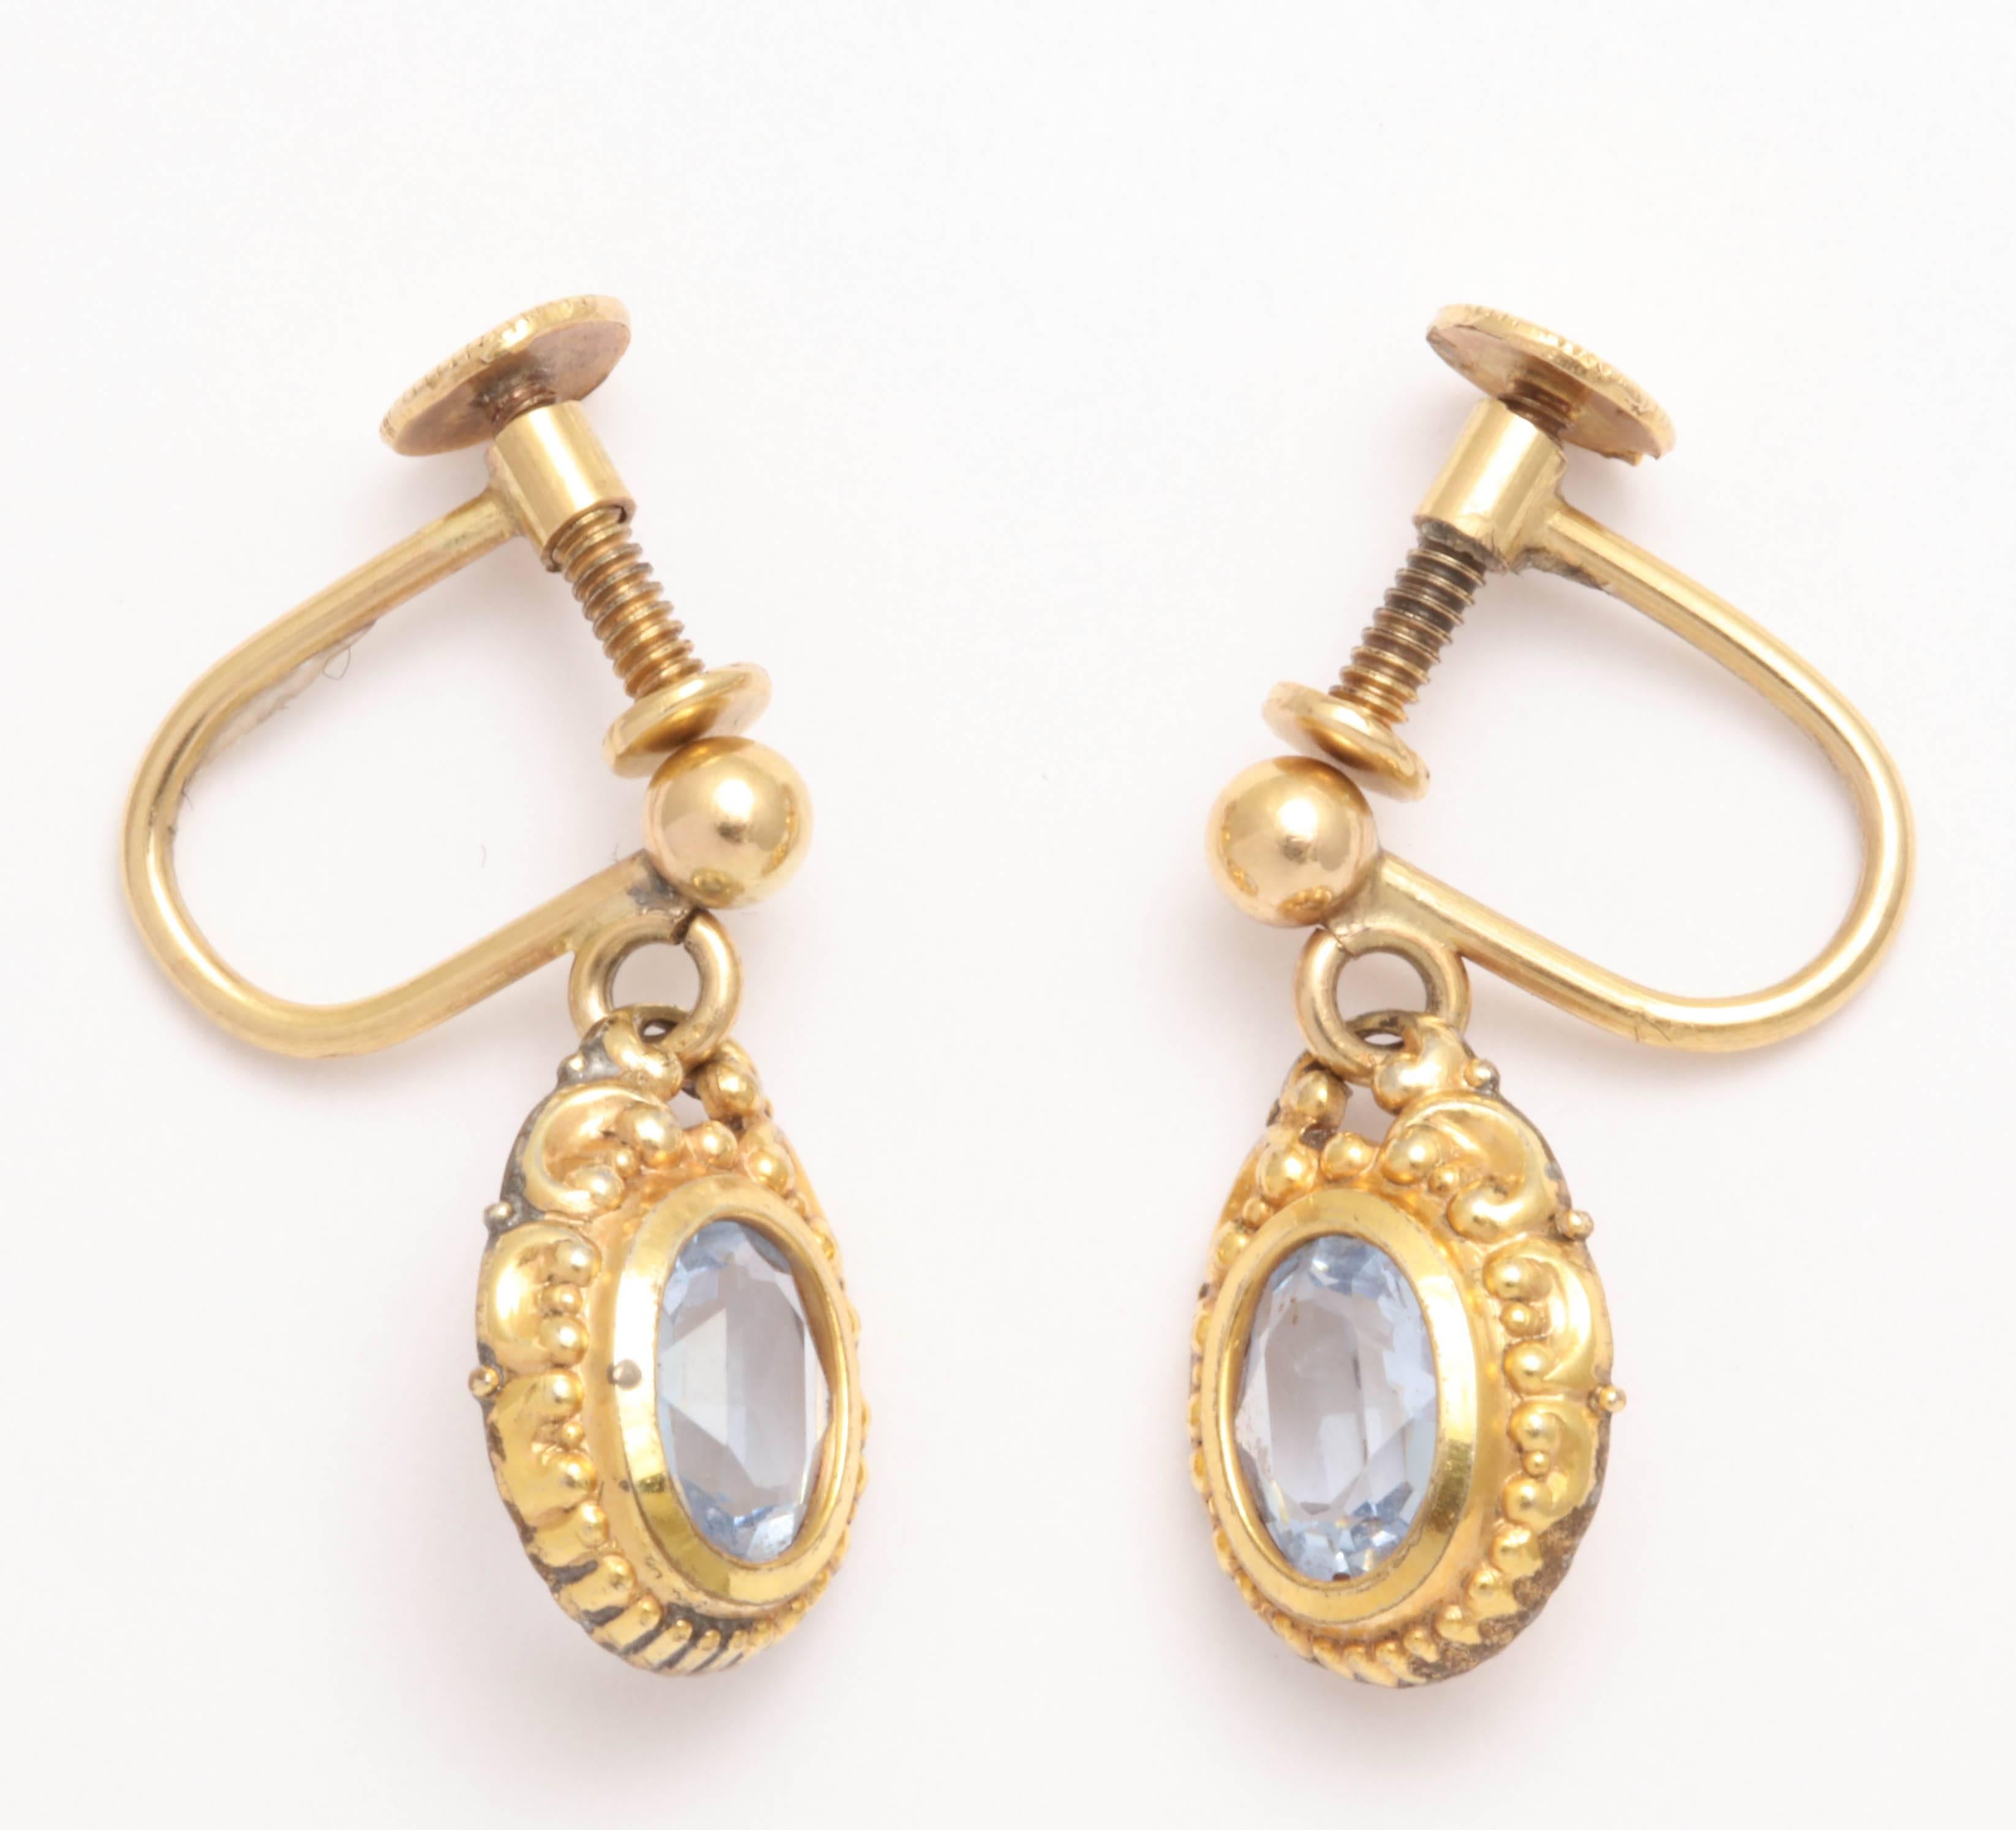 Very sweet aqua earrings dating to the early 20th century. Rolled gold fronts and yellow gold screw backs. Lovely faceted oval aquas. 

They can be changed to posts. 

